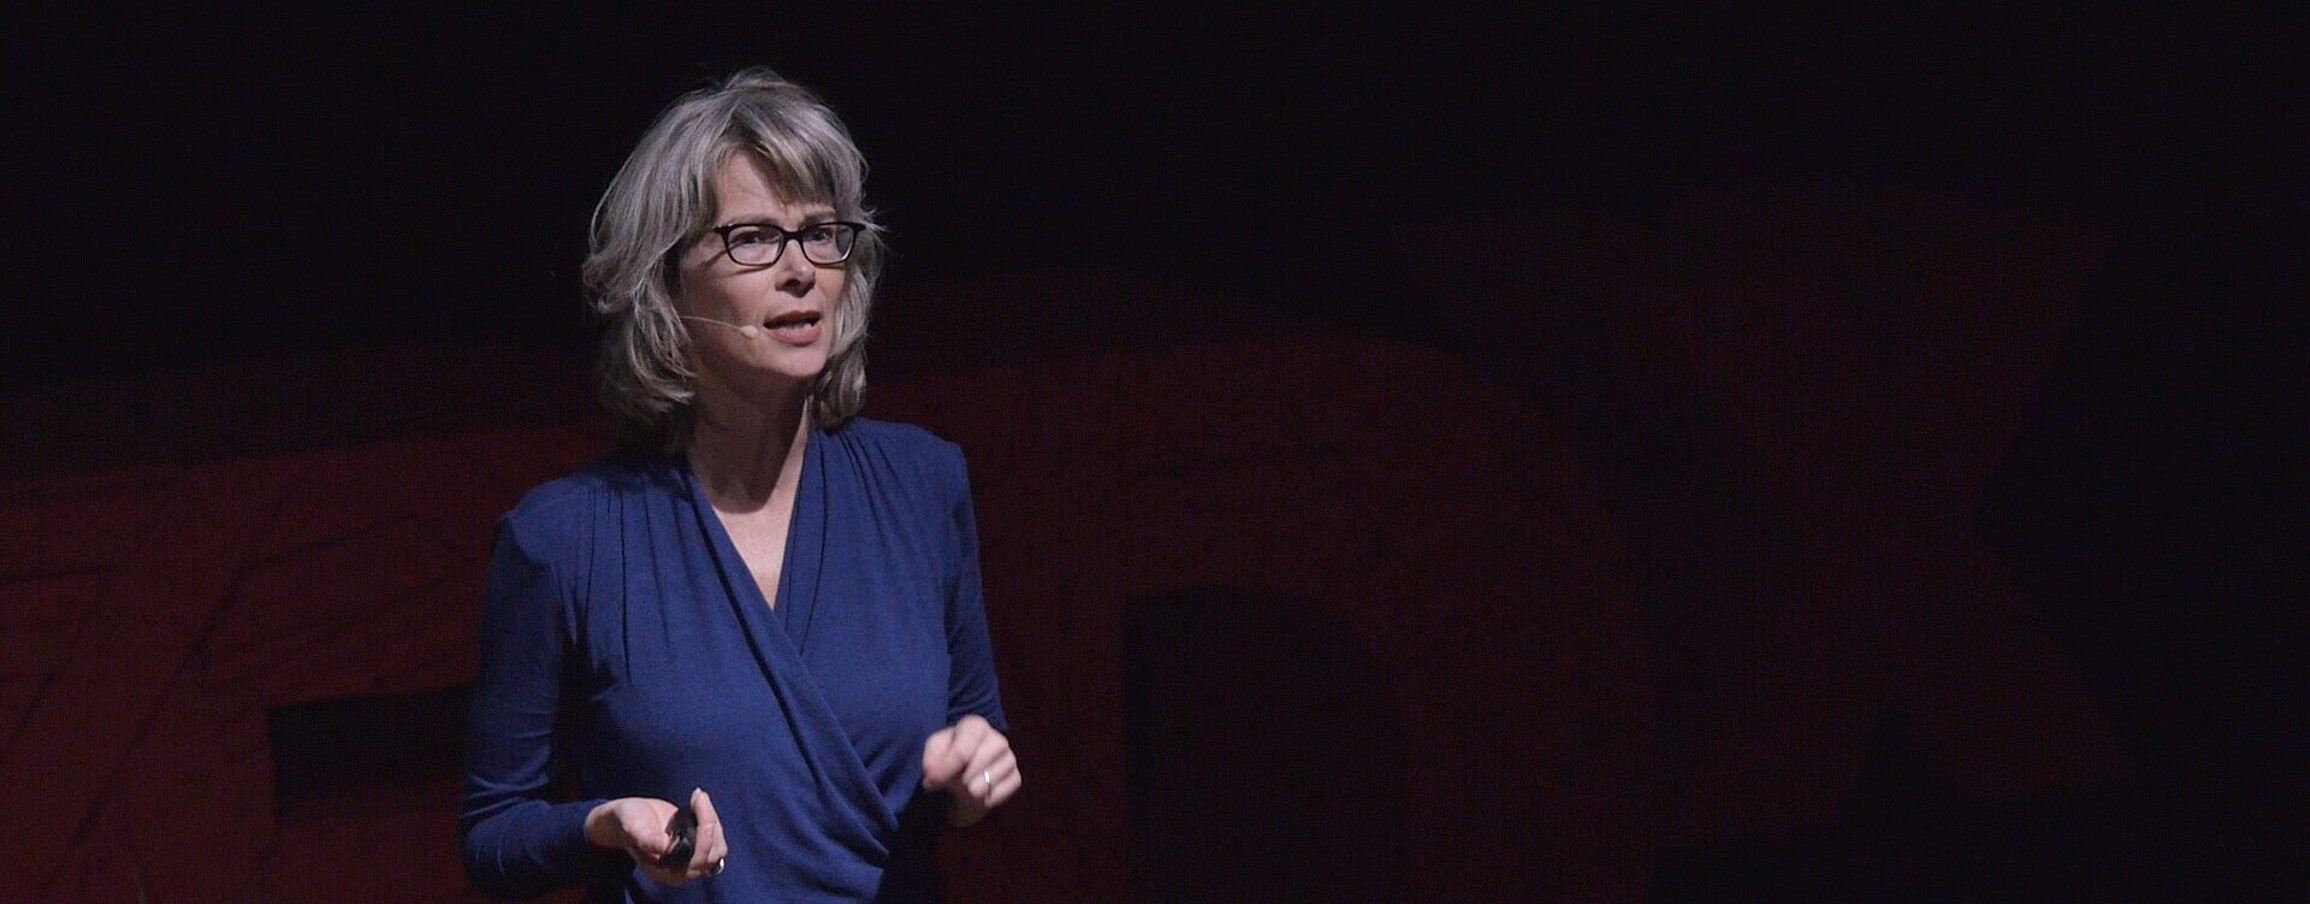 Gail Whiteman, Professor of Sustainability, Management and Climate Change at RSM, sharing her perspectives on how companies can deal with sustainability challenges during her TEDxRSM talk.